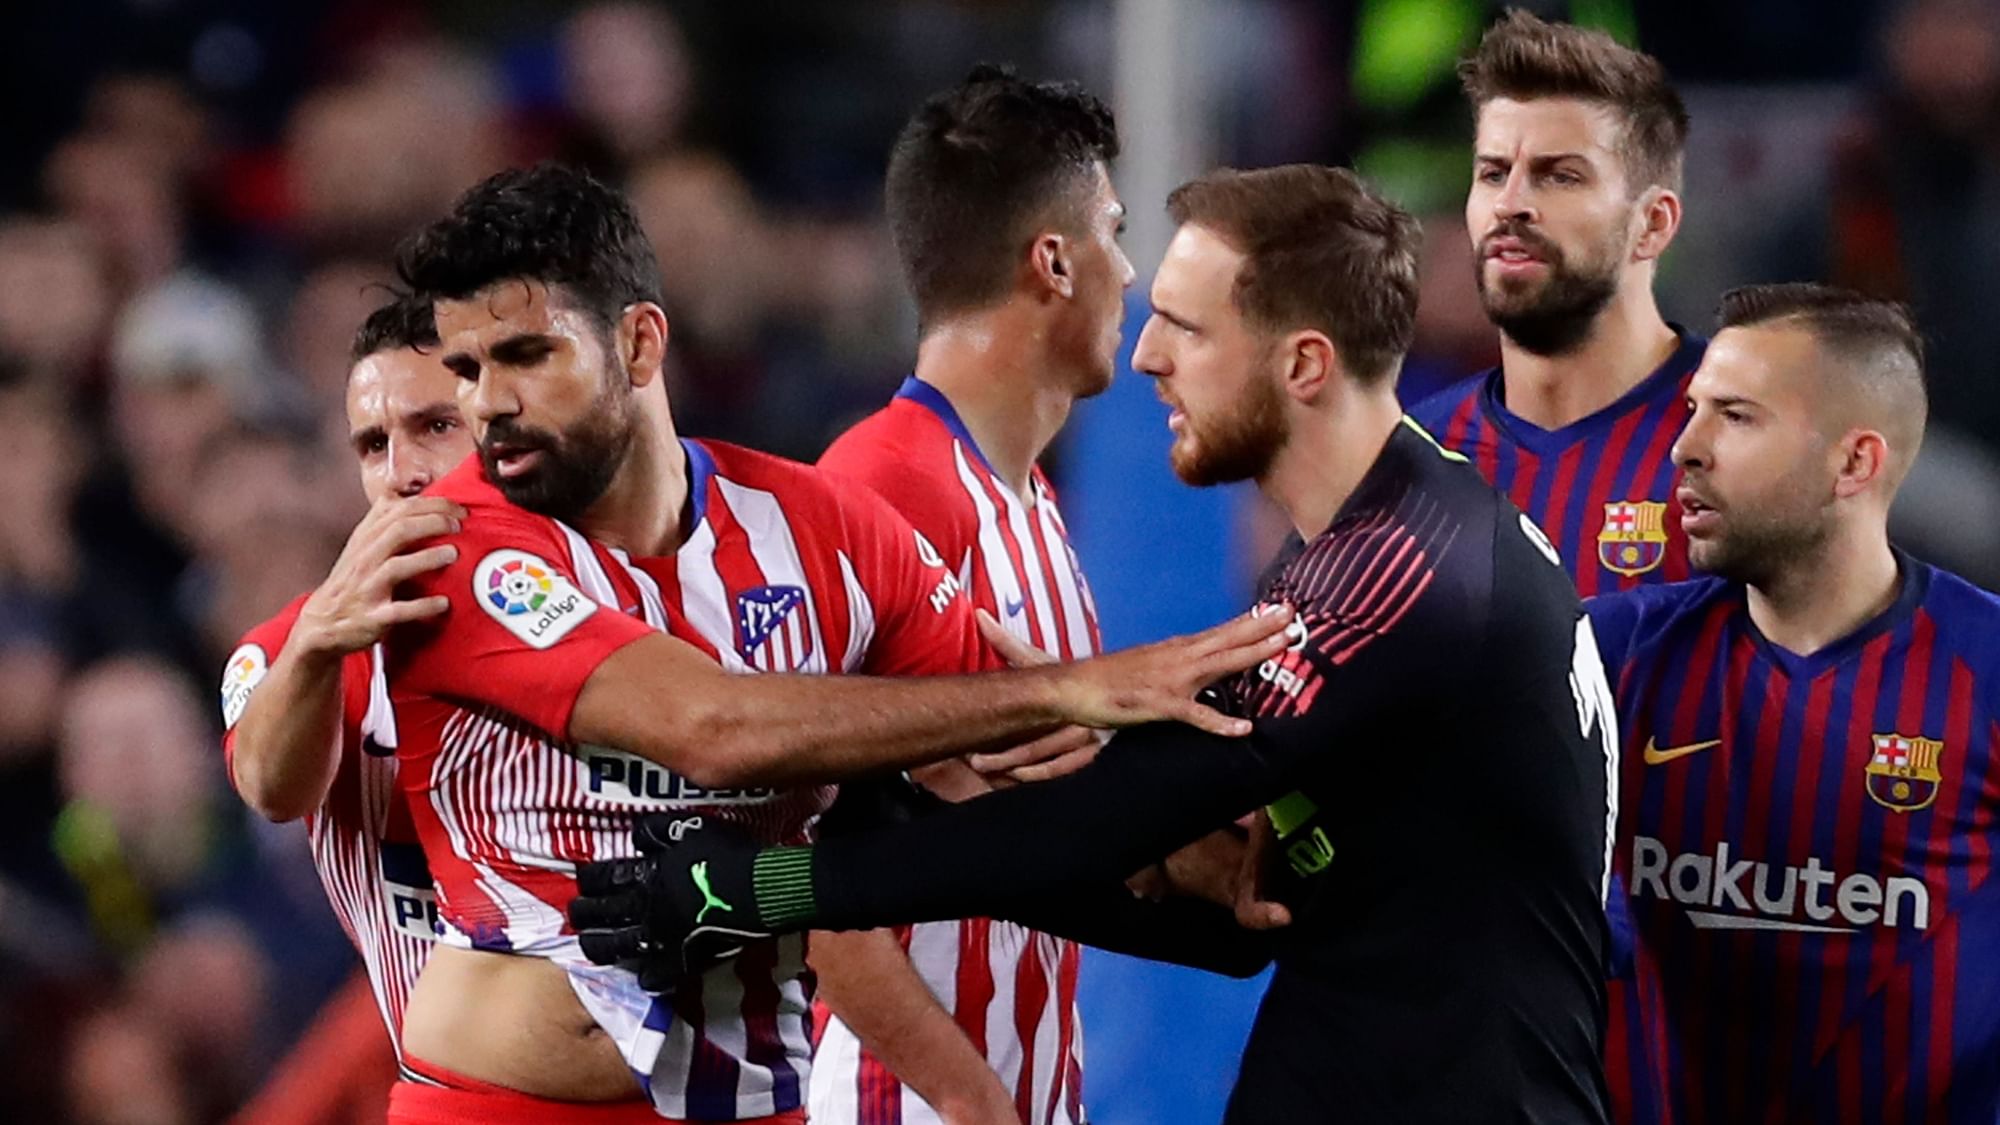 Atletico goalkeeper Jan Oblak, center right, tries to calm down teammate Diego Costa, left, after he was sent off with a red card for insulting referee Jesus Gil Manzano.